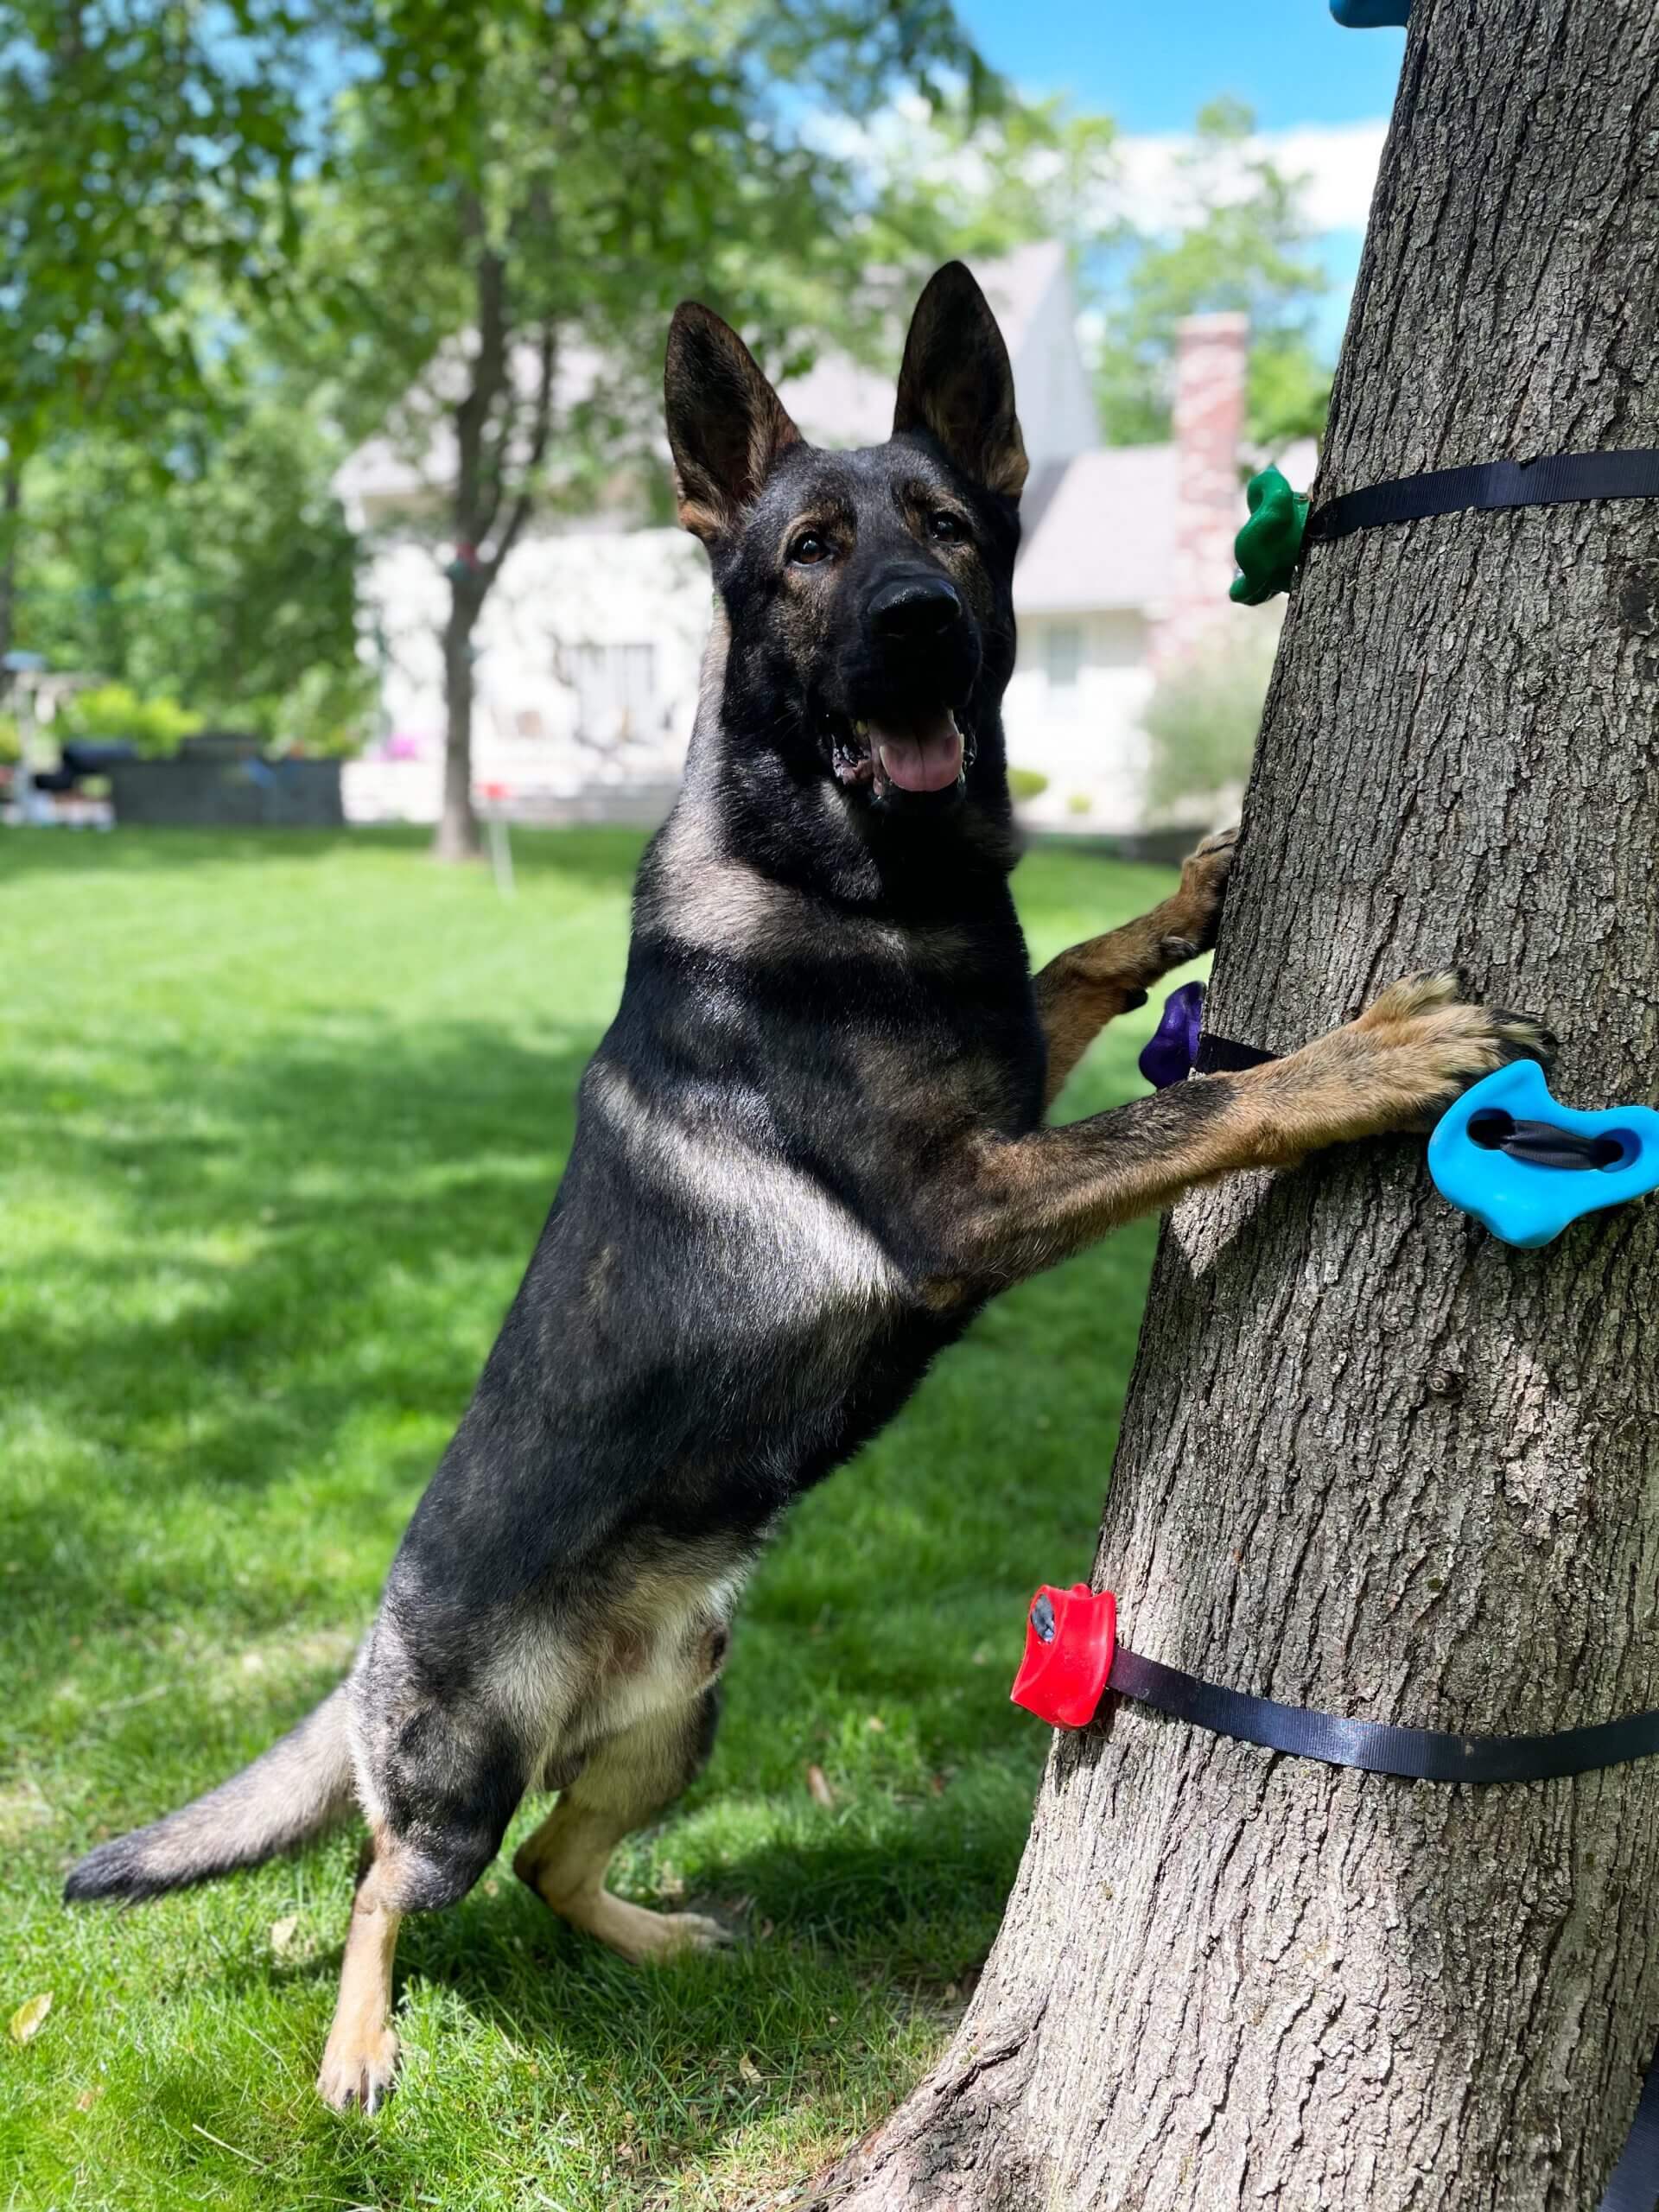 Protection dog leaning on a tree in a yard